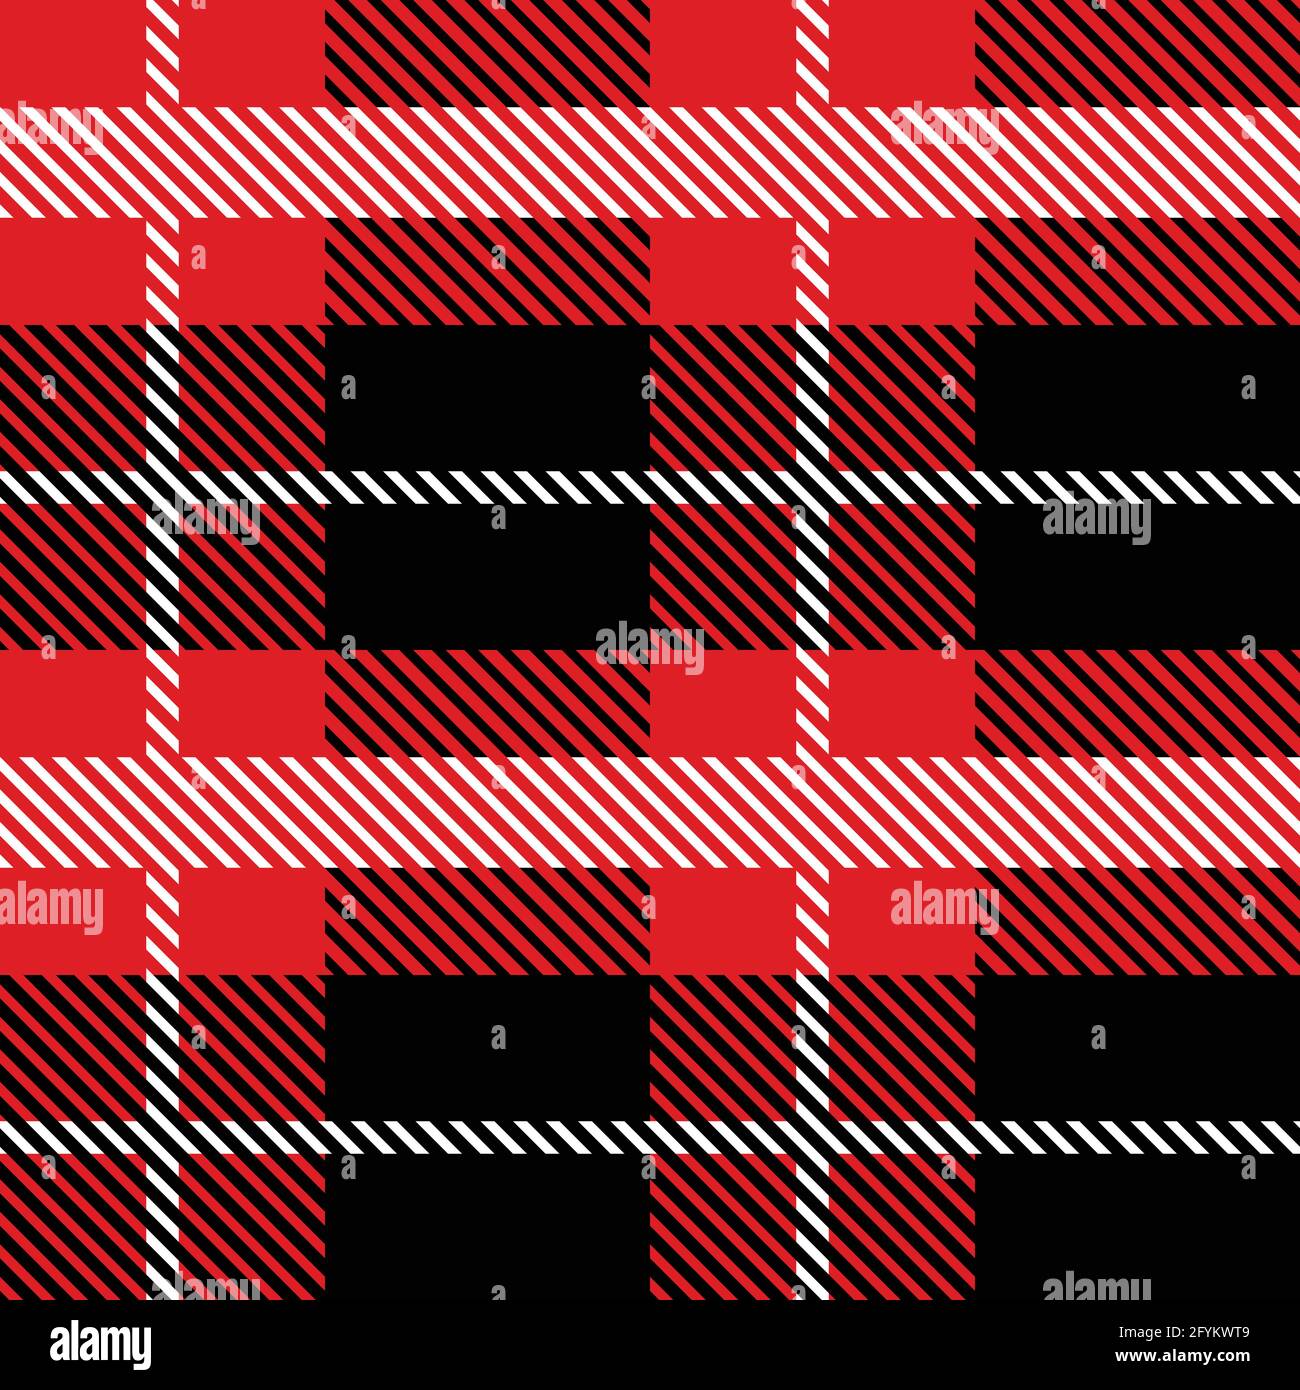 Abstract Geometric Tartan Check Seamless Pattern Buffalo Check Plaid  Gingham Checker Black Red Endless Texture With For Decorative Paper Fabric  Vector Christmas Background Stock Illustration - Download Image Now - iStock